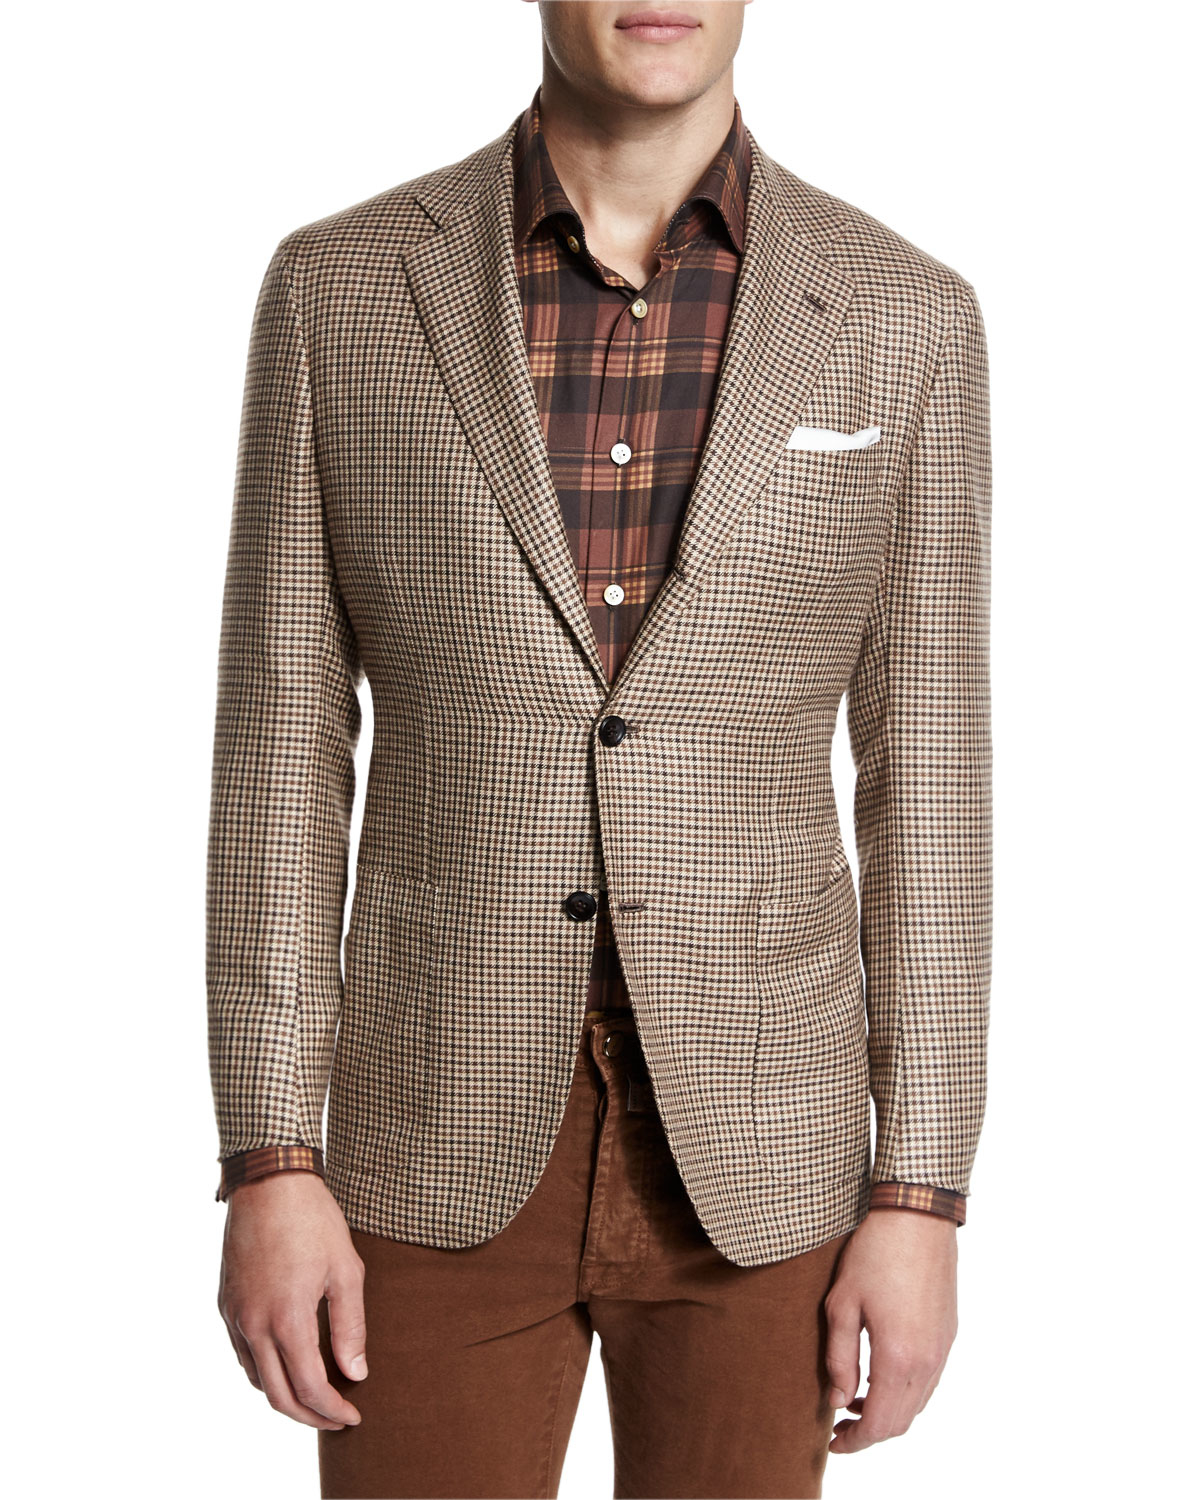 Lyst - Kiton Houndstooth Two-button Cashmere Jacket in Brown for Men